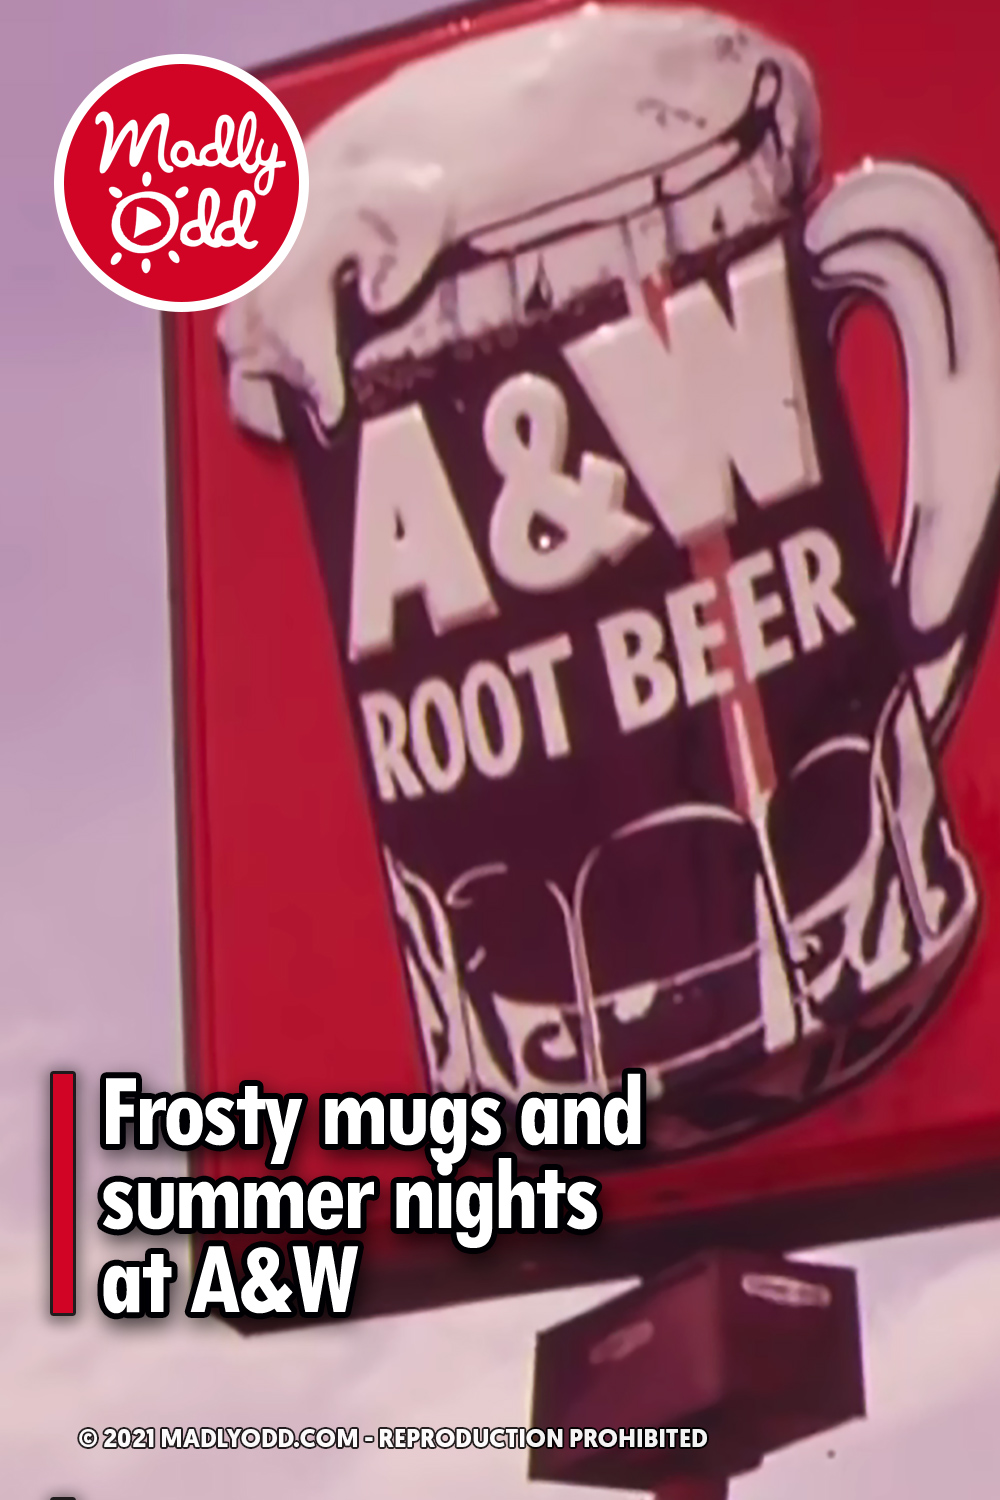 Frosty mugs and summer nights at A&W